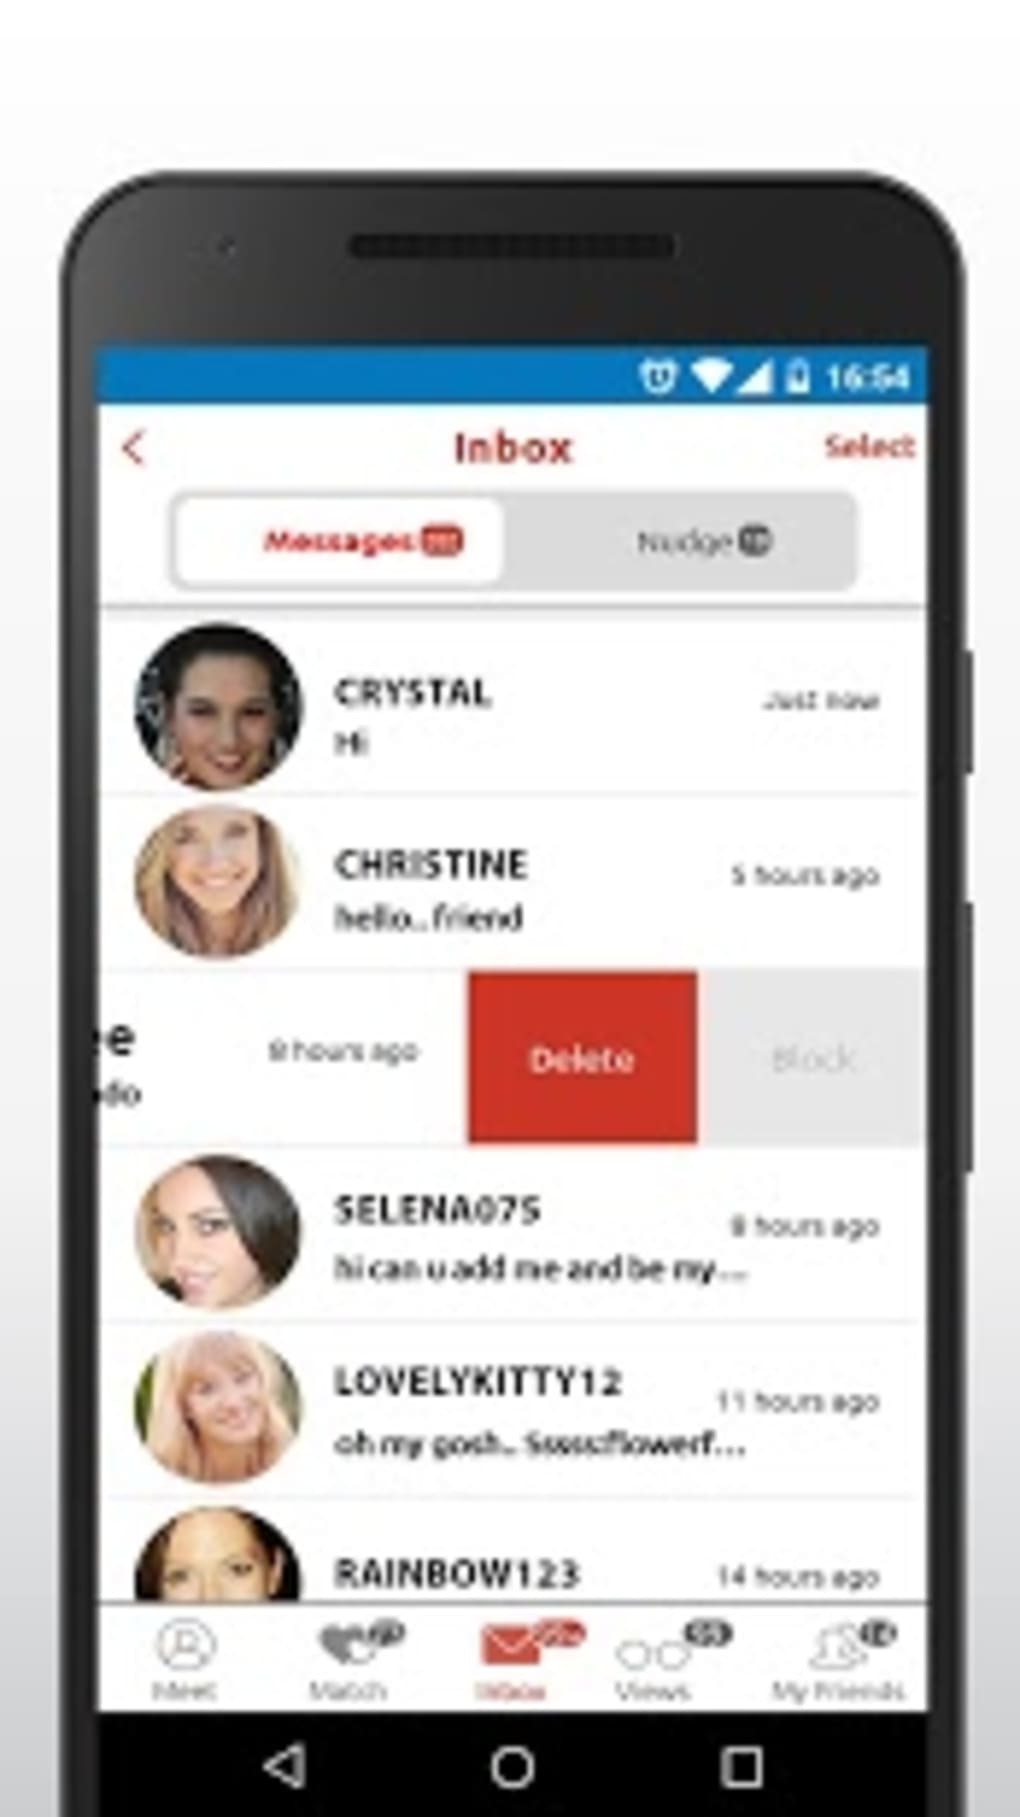 Dating-chat jetzt online app